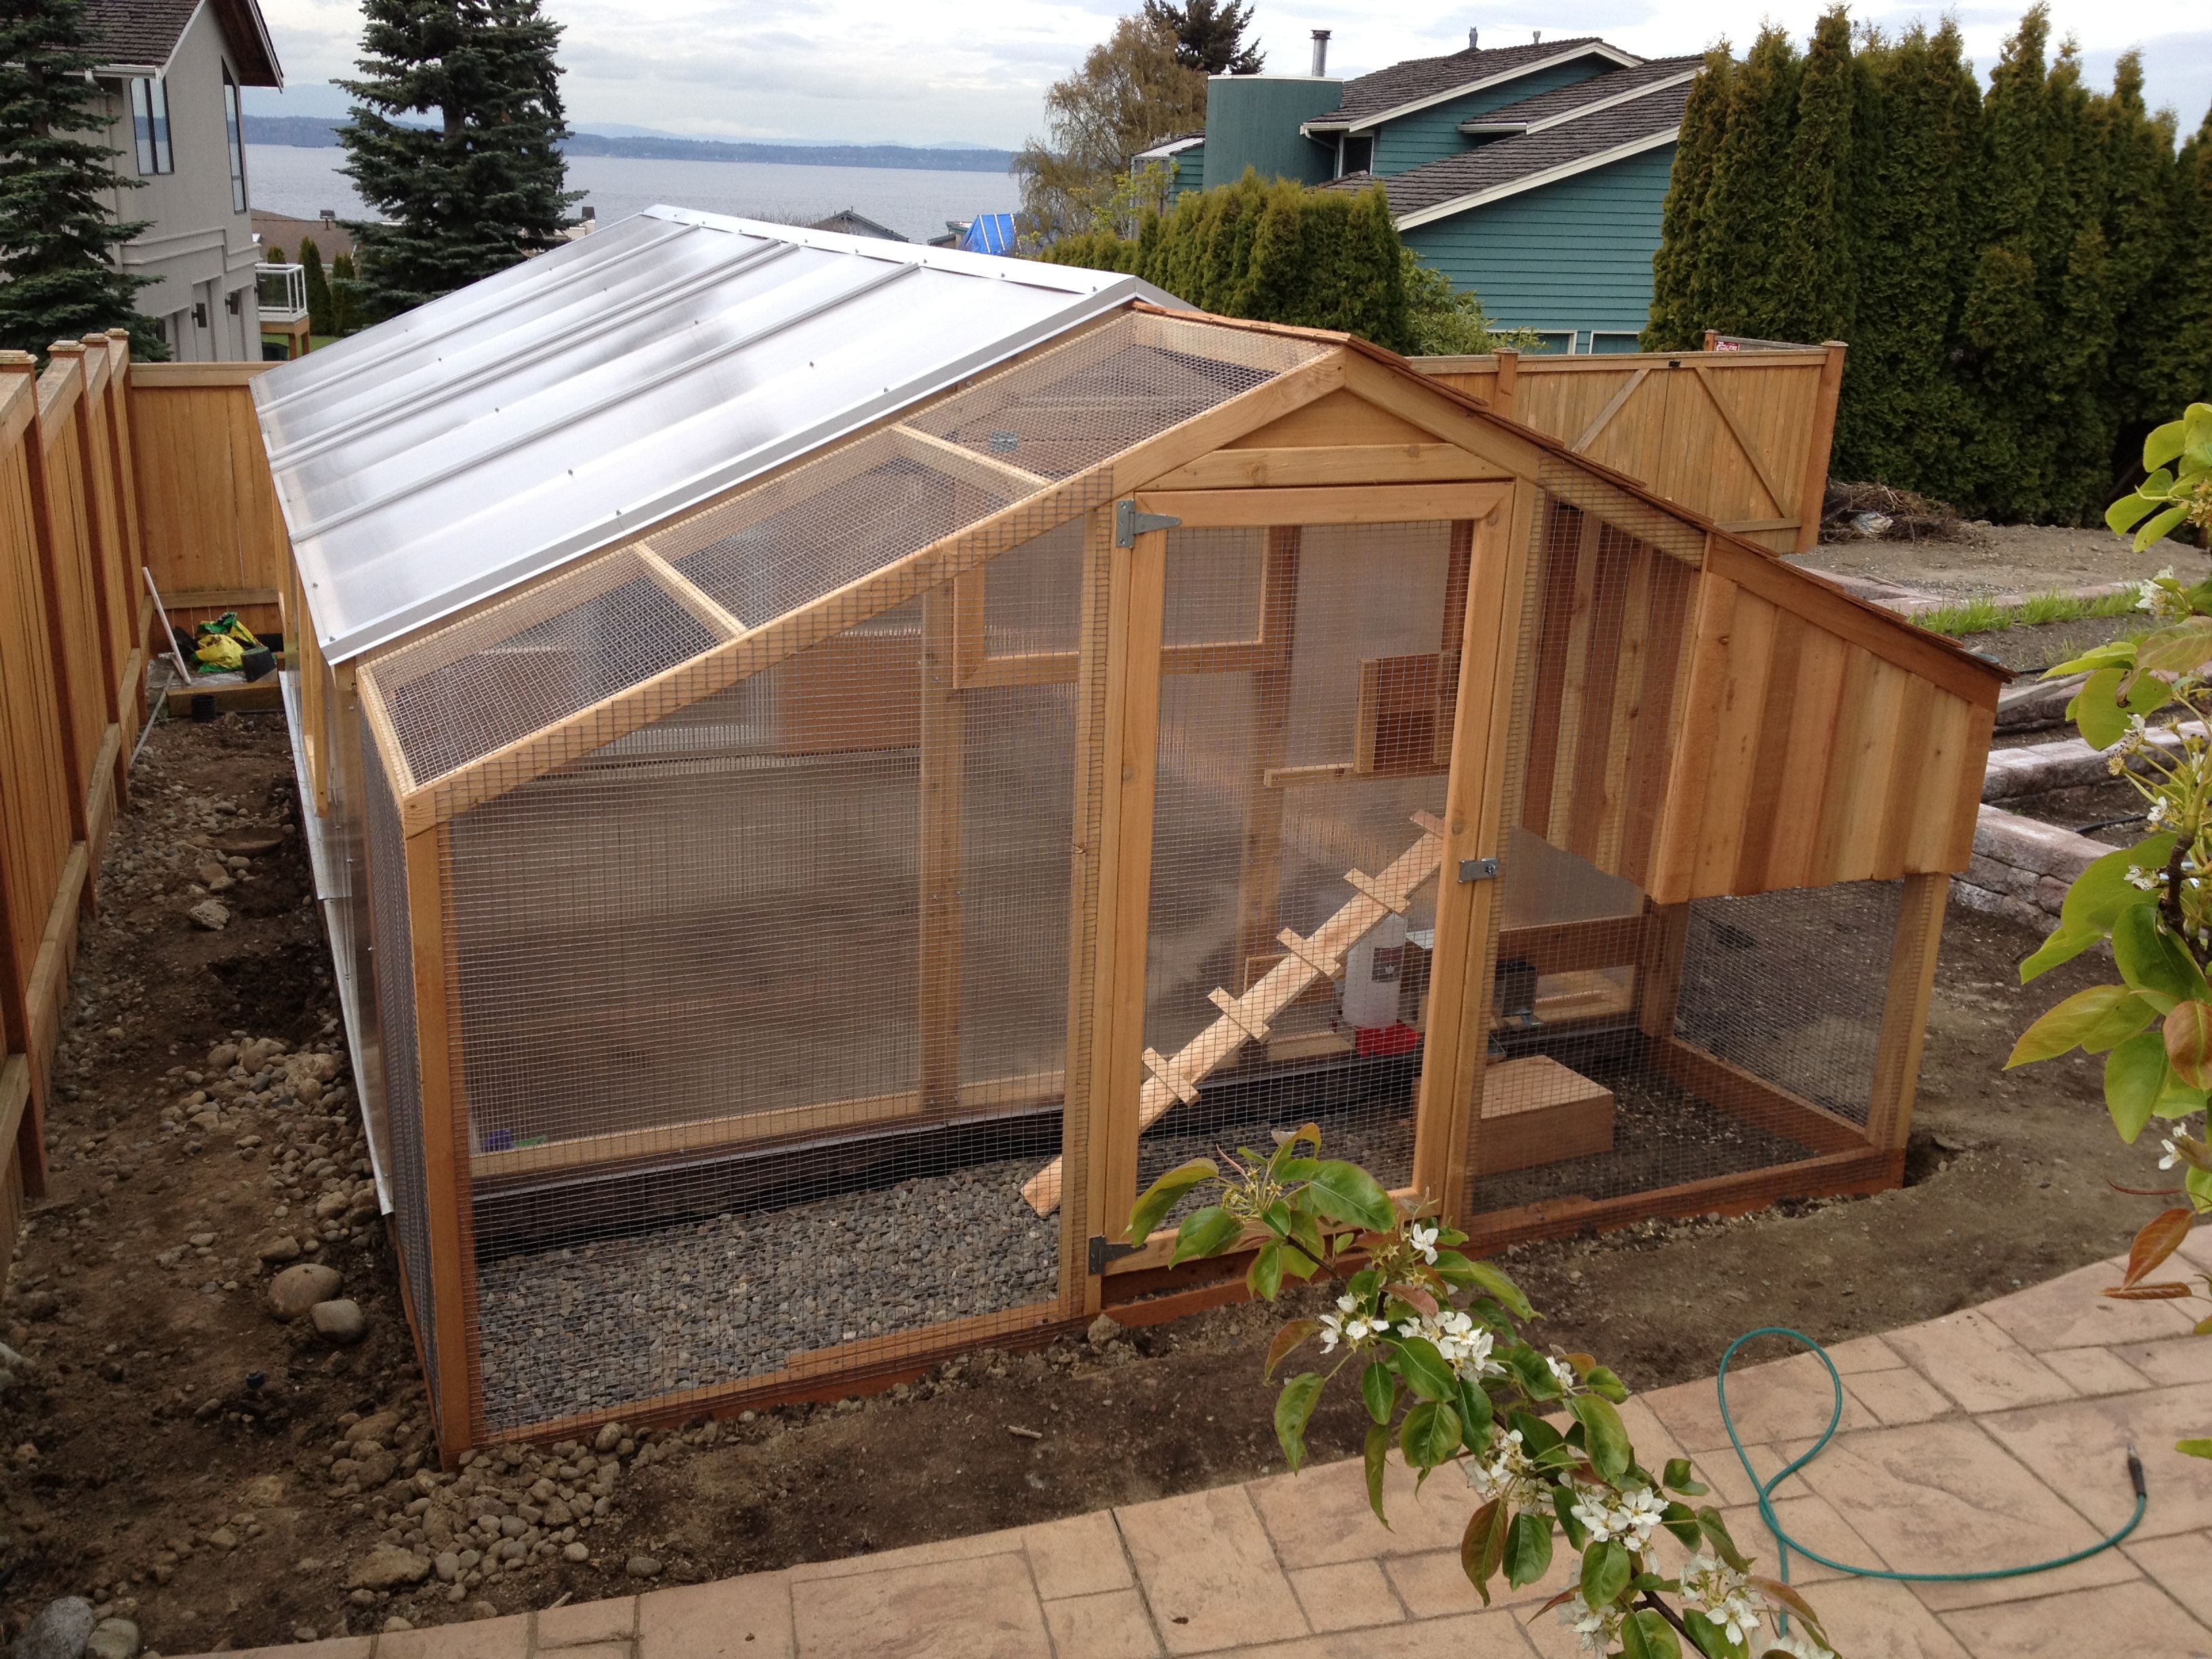 ... did when he wanted a 11×17 Greenhouse with attached Chicken Coop